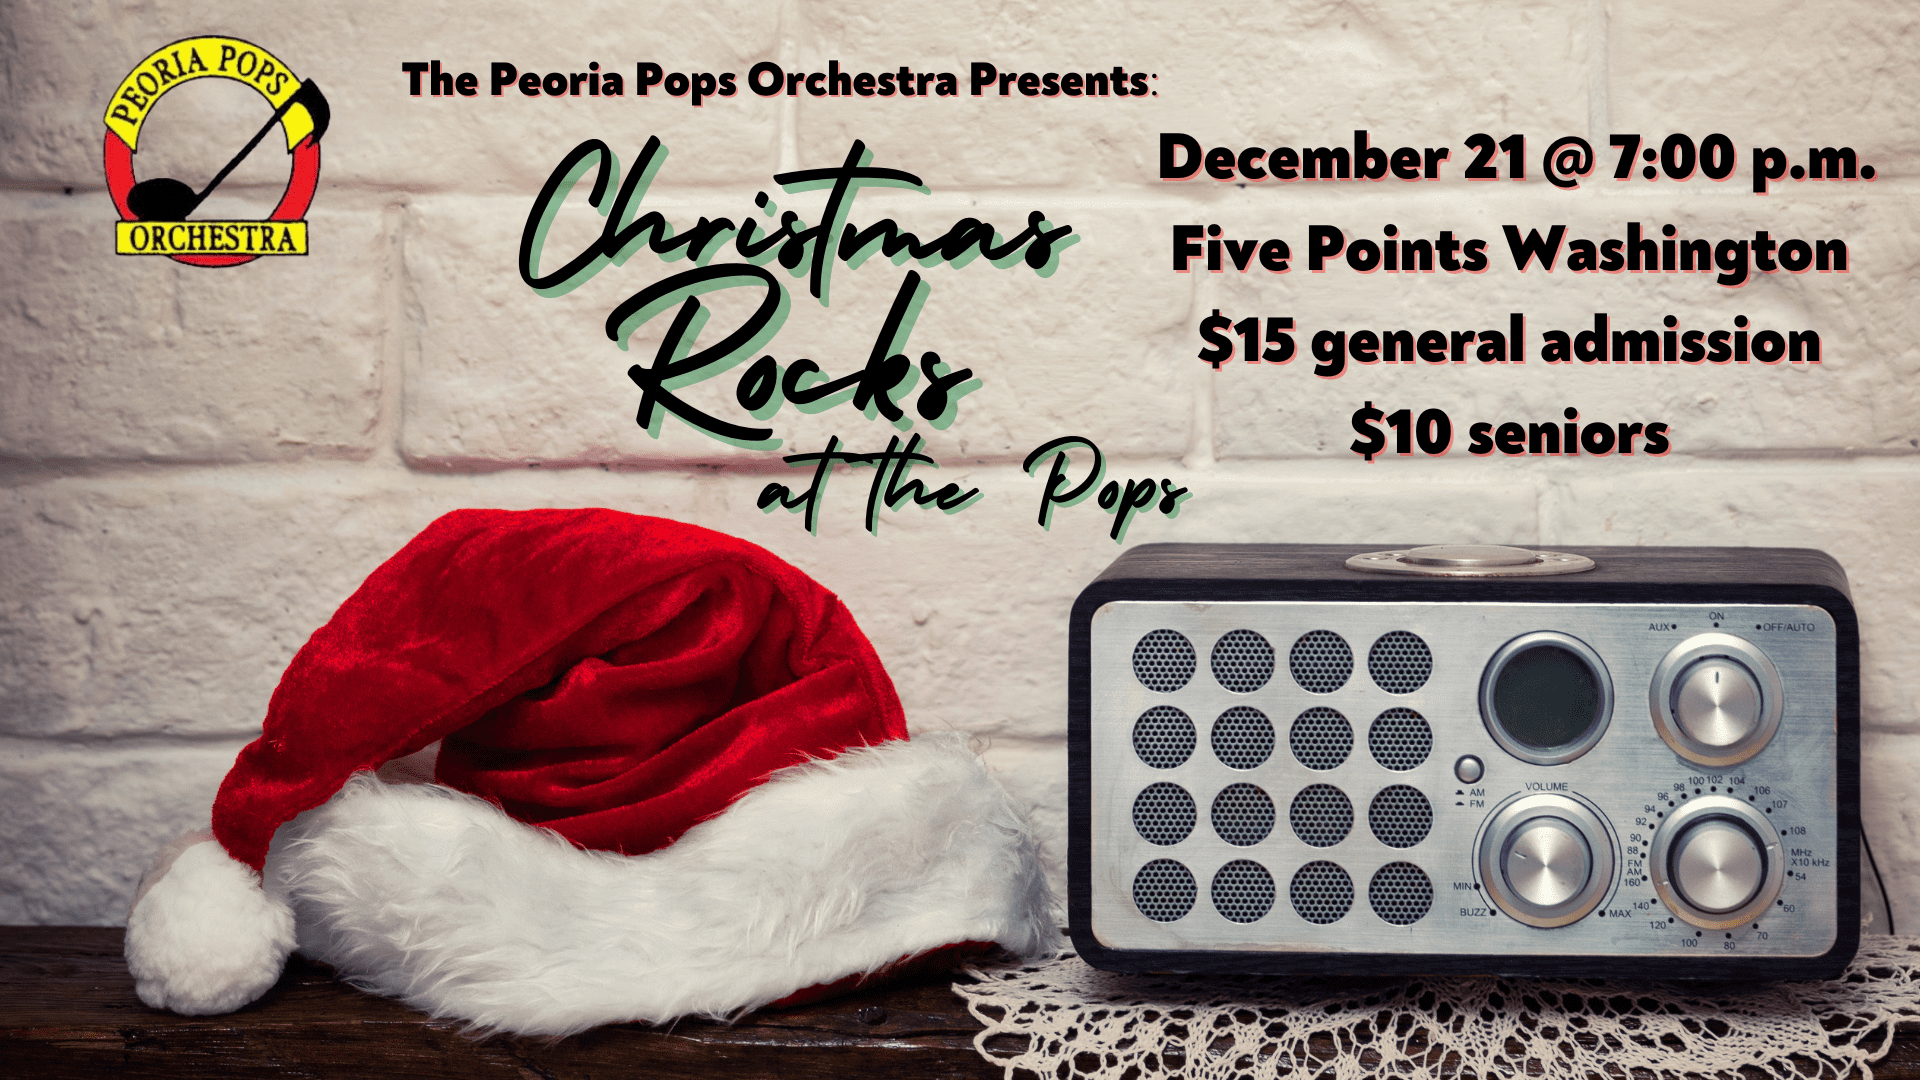 Christmas Rocks at the Pops Facebook event